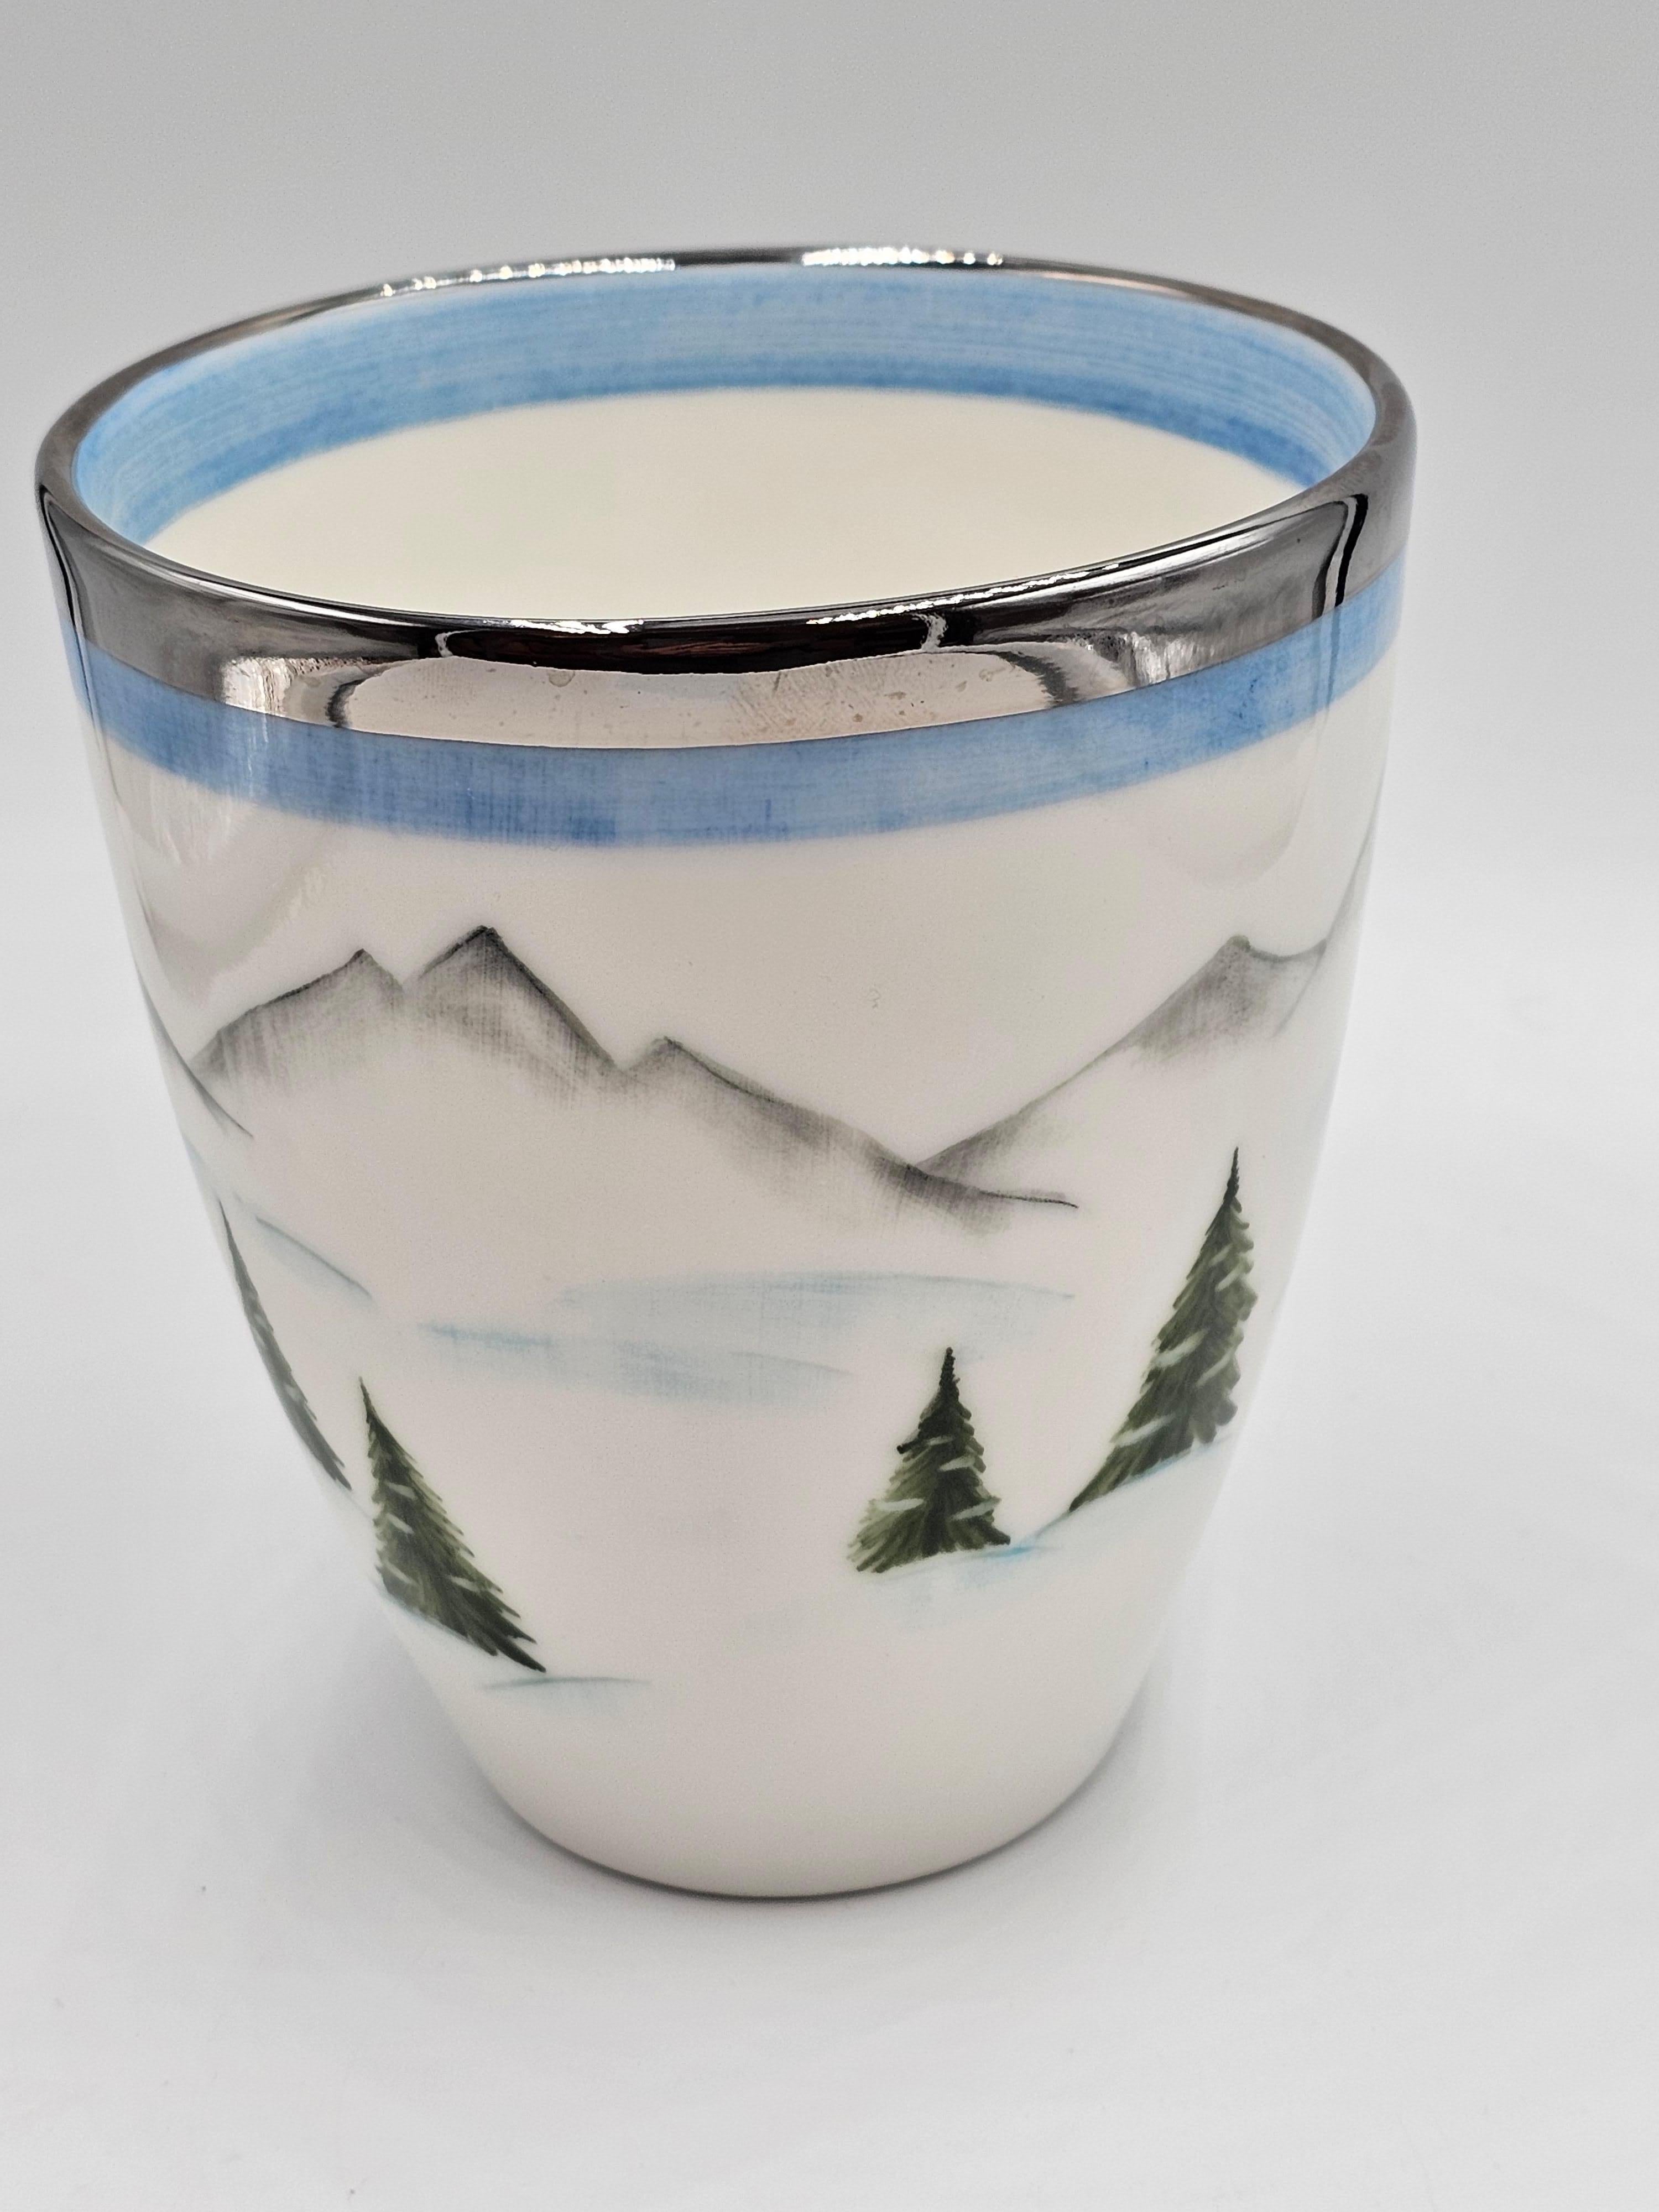 Completely handmade porcelain vase with a hands-free painted skier decor all around in Country style. Hands-free painted in a nostalgic design with a skier boy , trees and a hut in the mountains all around. Rimmed with a colored line in blue and